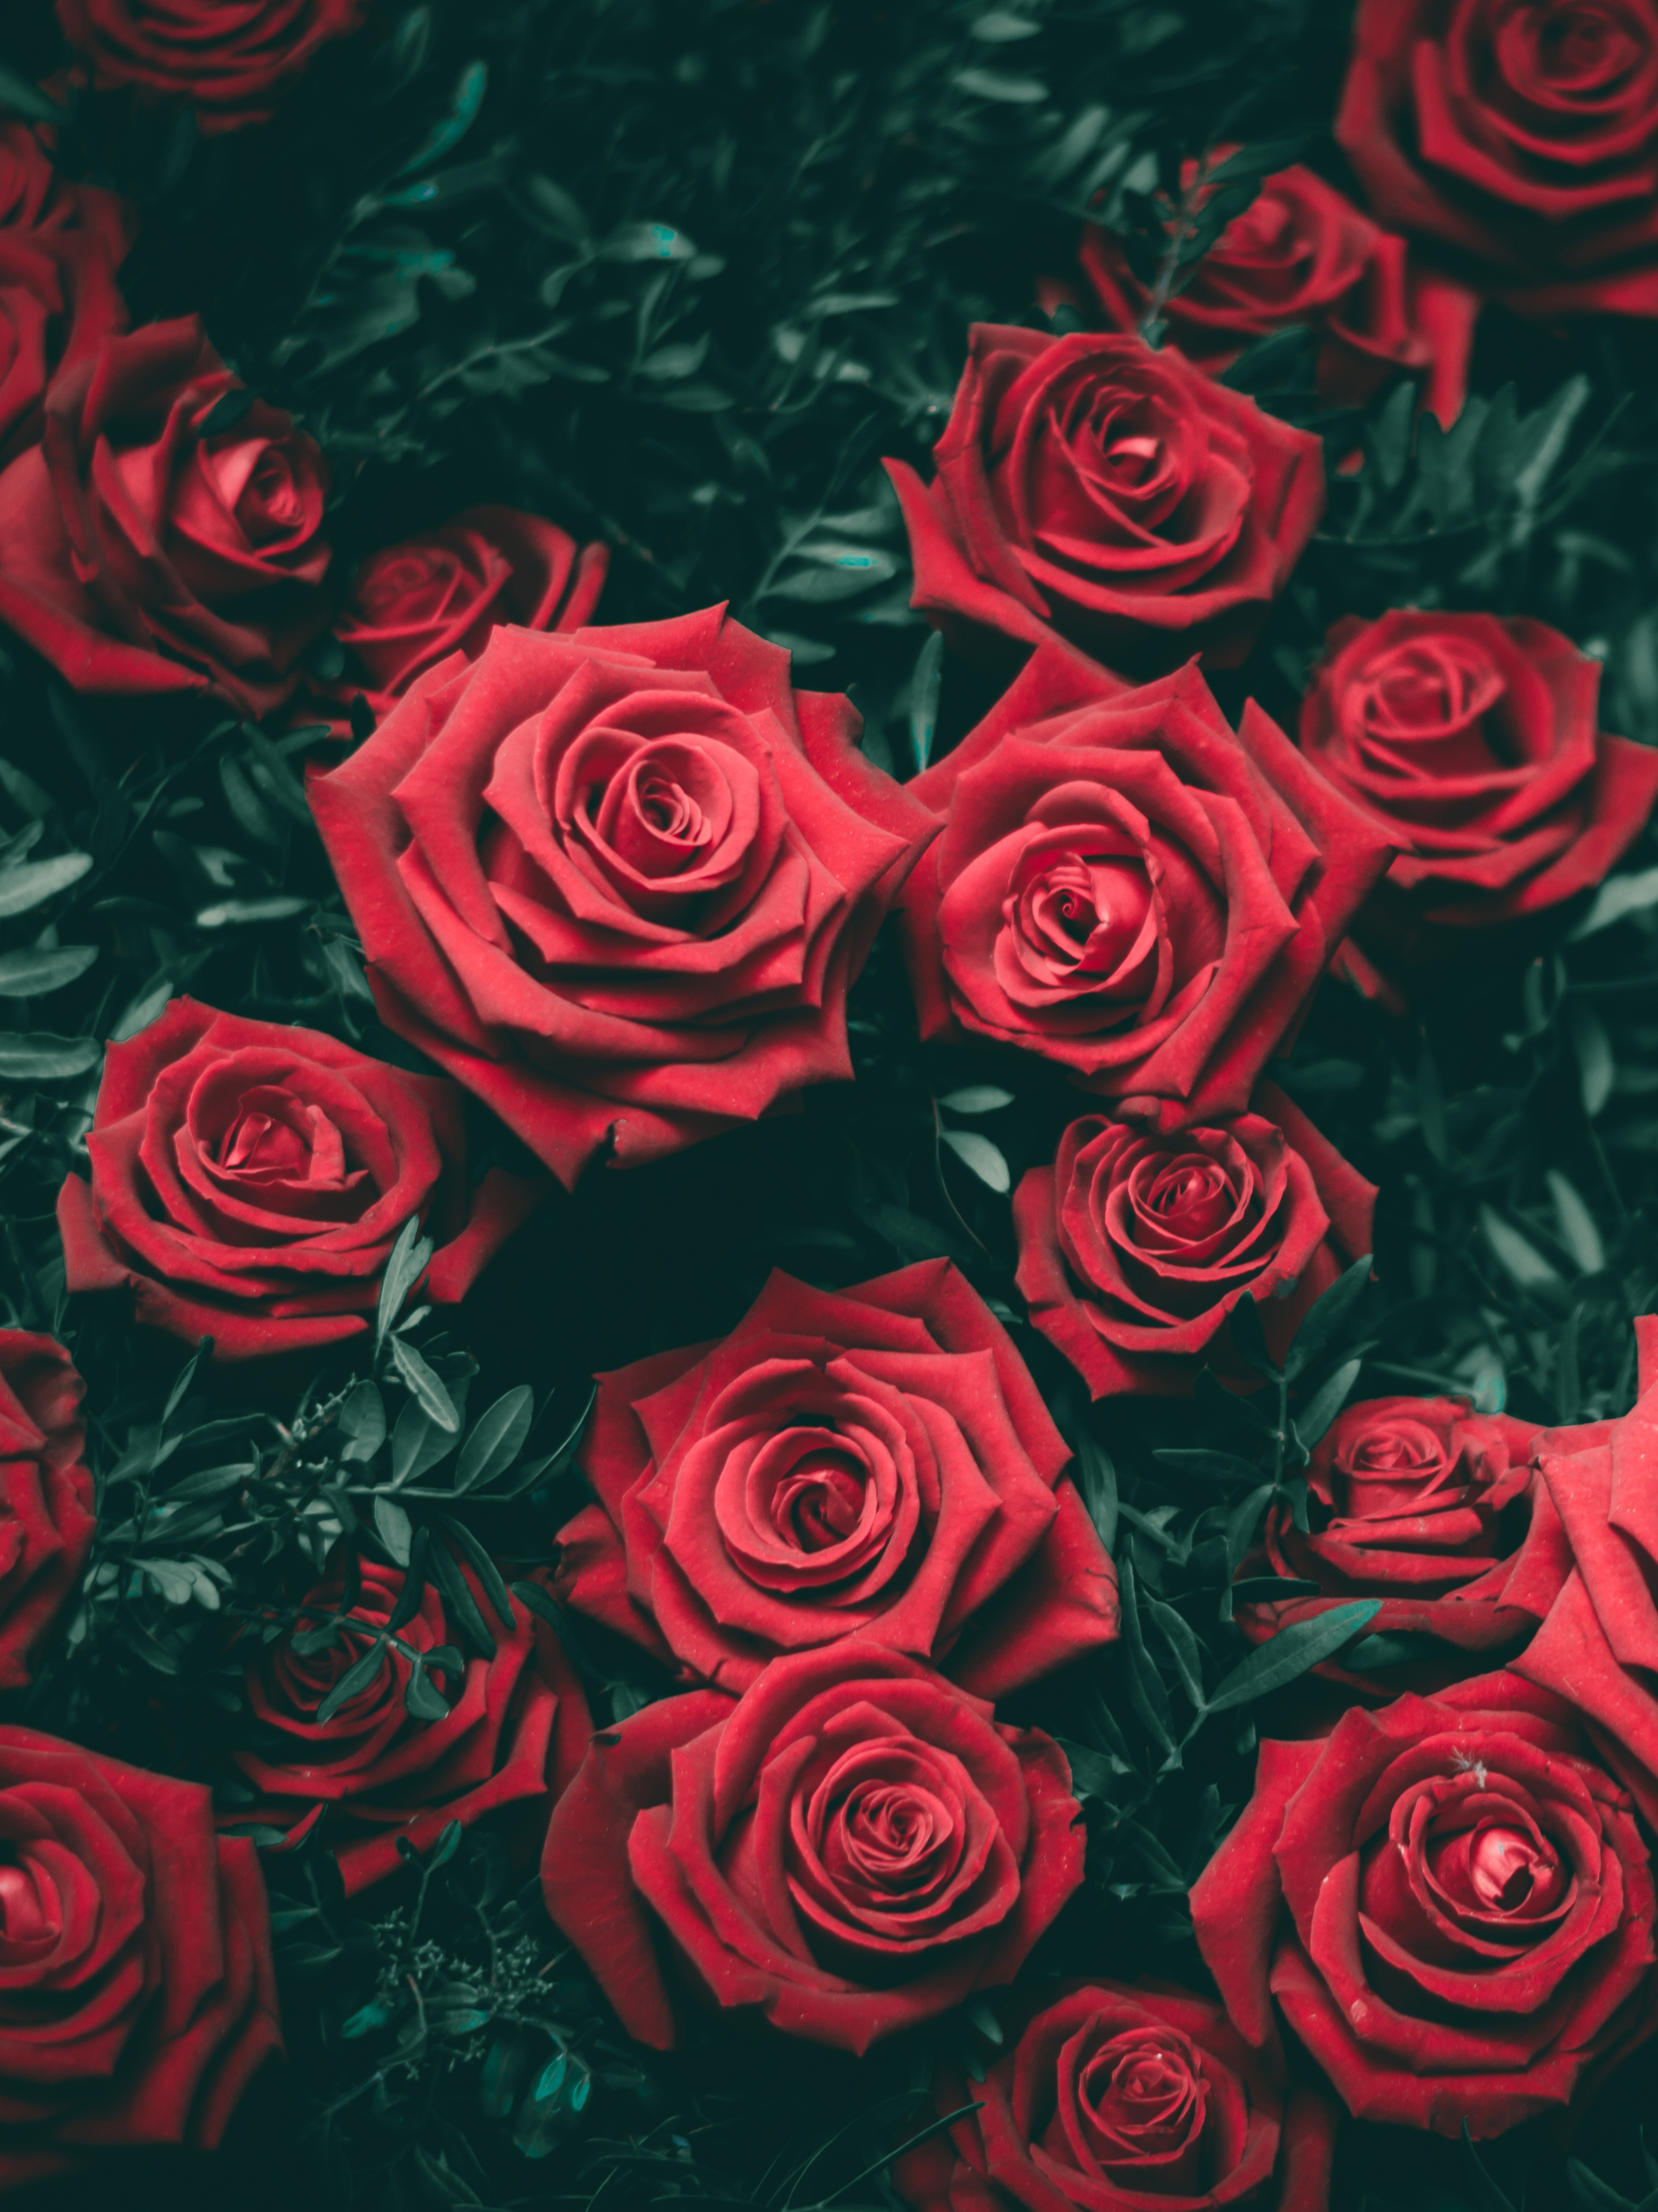 Beautiful Rose Flowers With White Petals And Red Edges Drops Water Dark  Green Wallpaper 3840x2400 : Wallpapers13.com